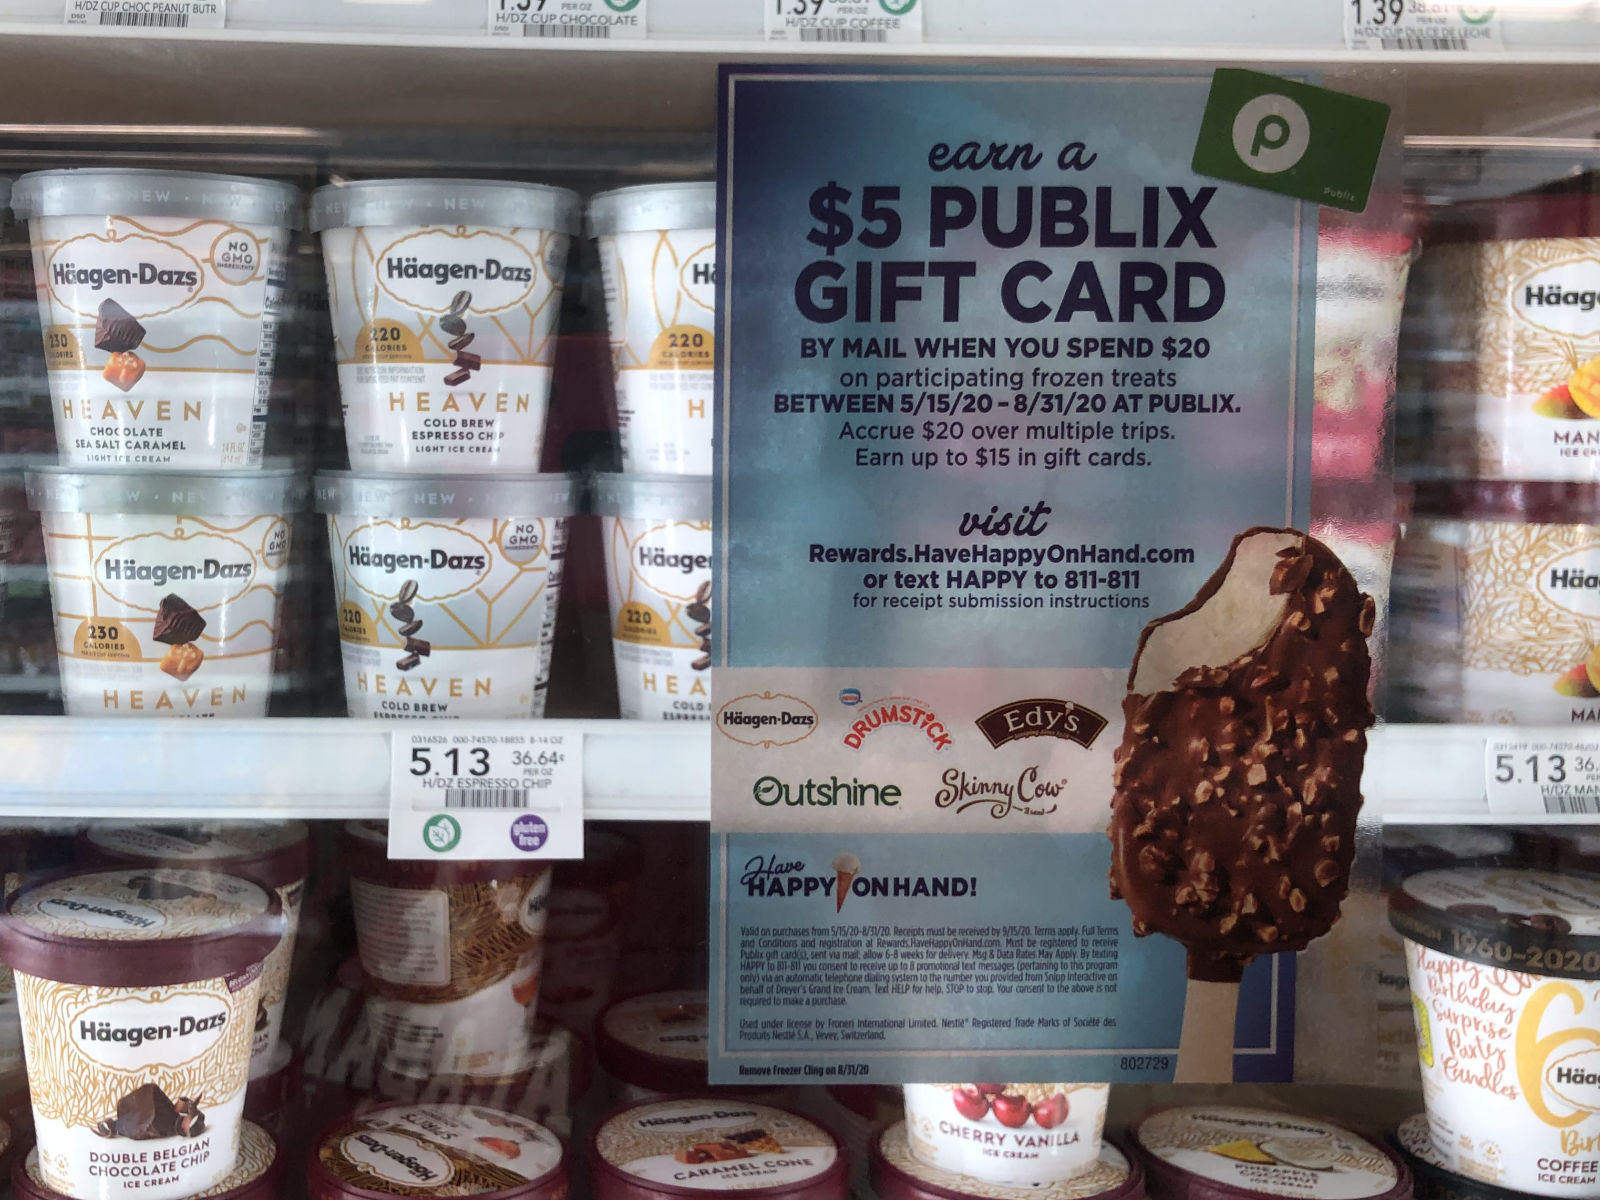 Only A Few Weeks Left To Earn Publix Gift Cards & Have Happy On Hand!